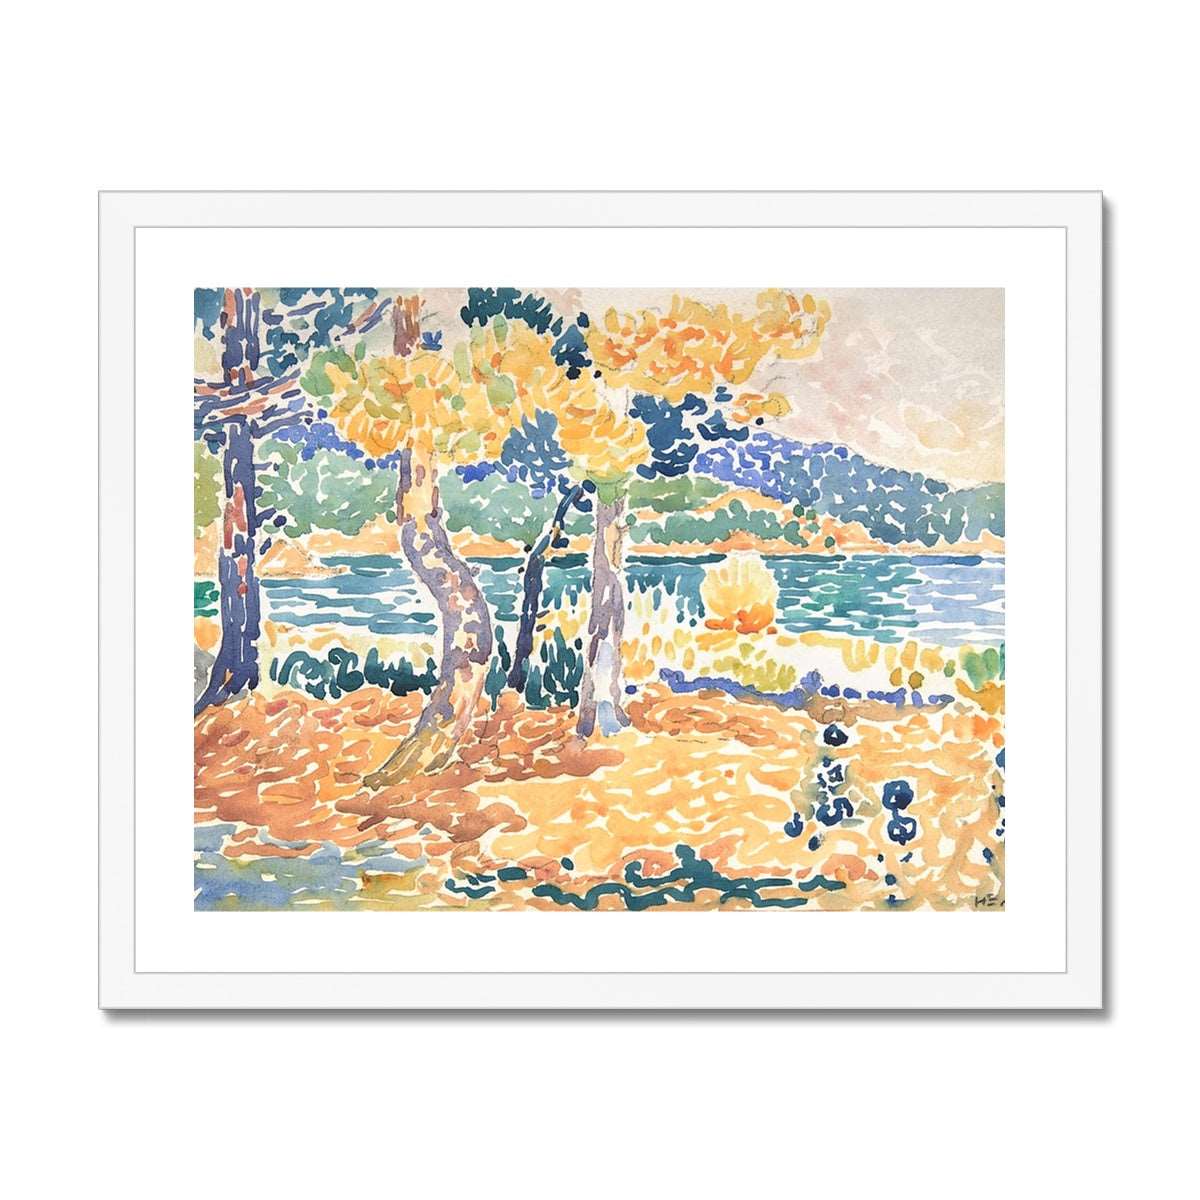 Cross - Pines on the Coastline gerahmtes Poster - Atopurinto